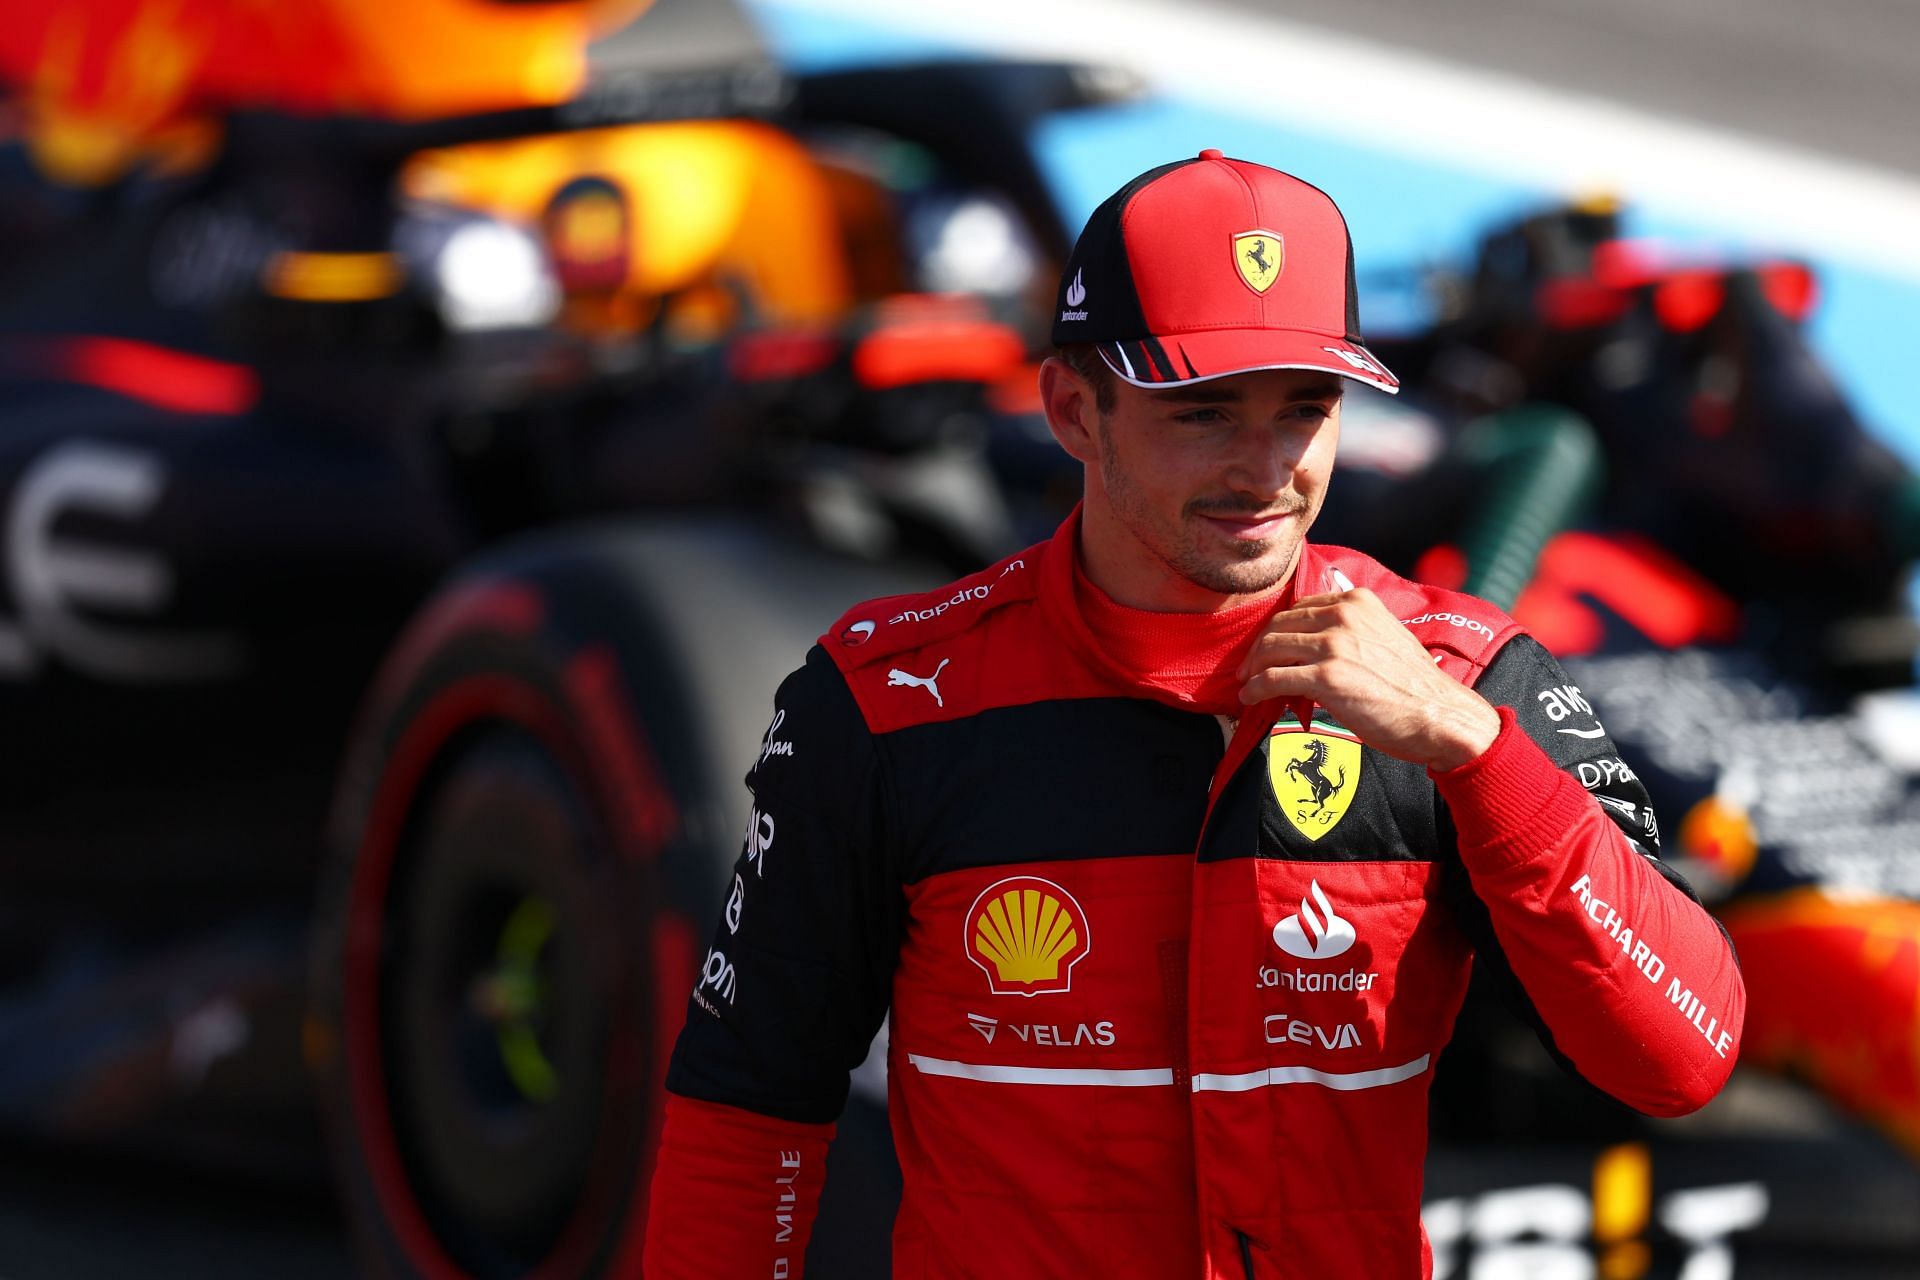 Charles Leclerc is pushing too hard, according to his former teammate